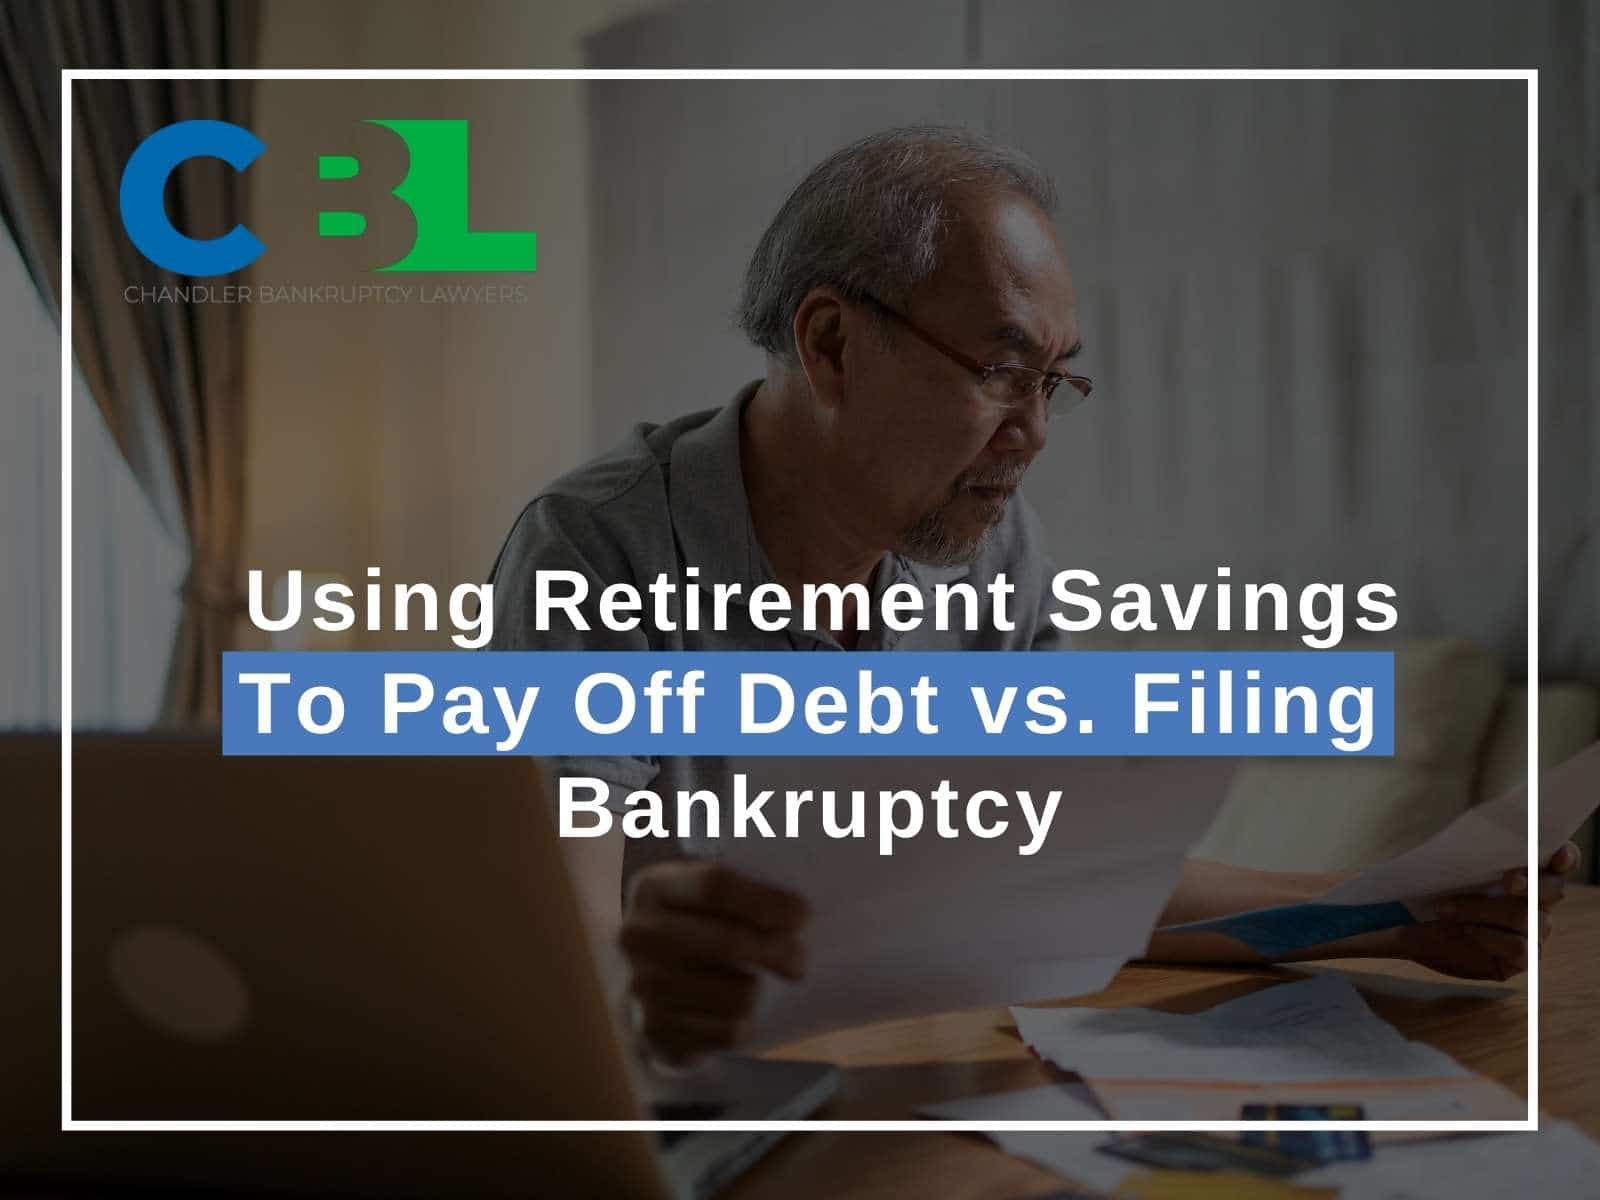 Using Retirement Savings To Pay Off Debt vs. Filing Bankruptcy